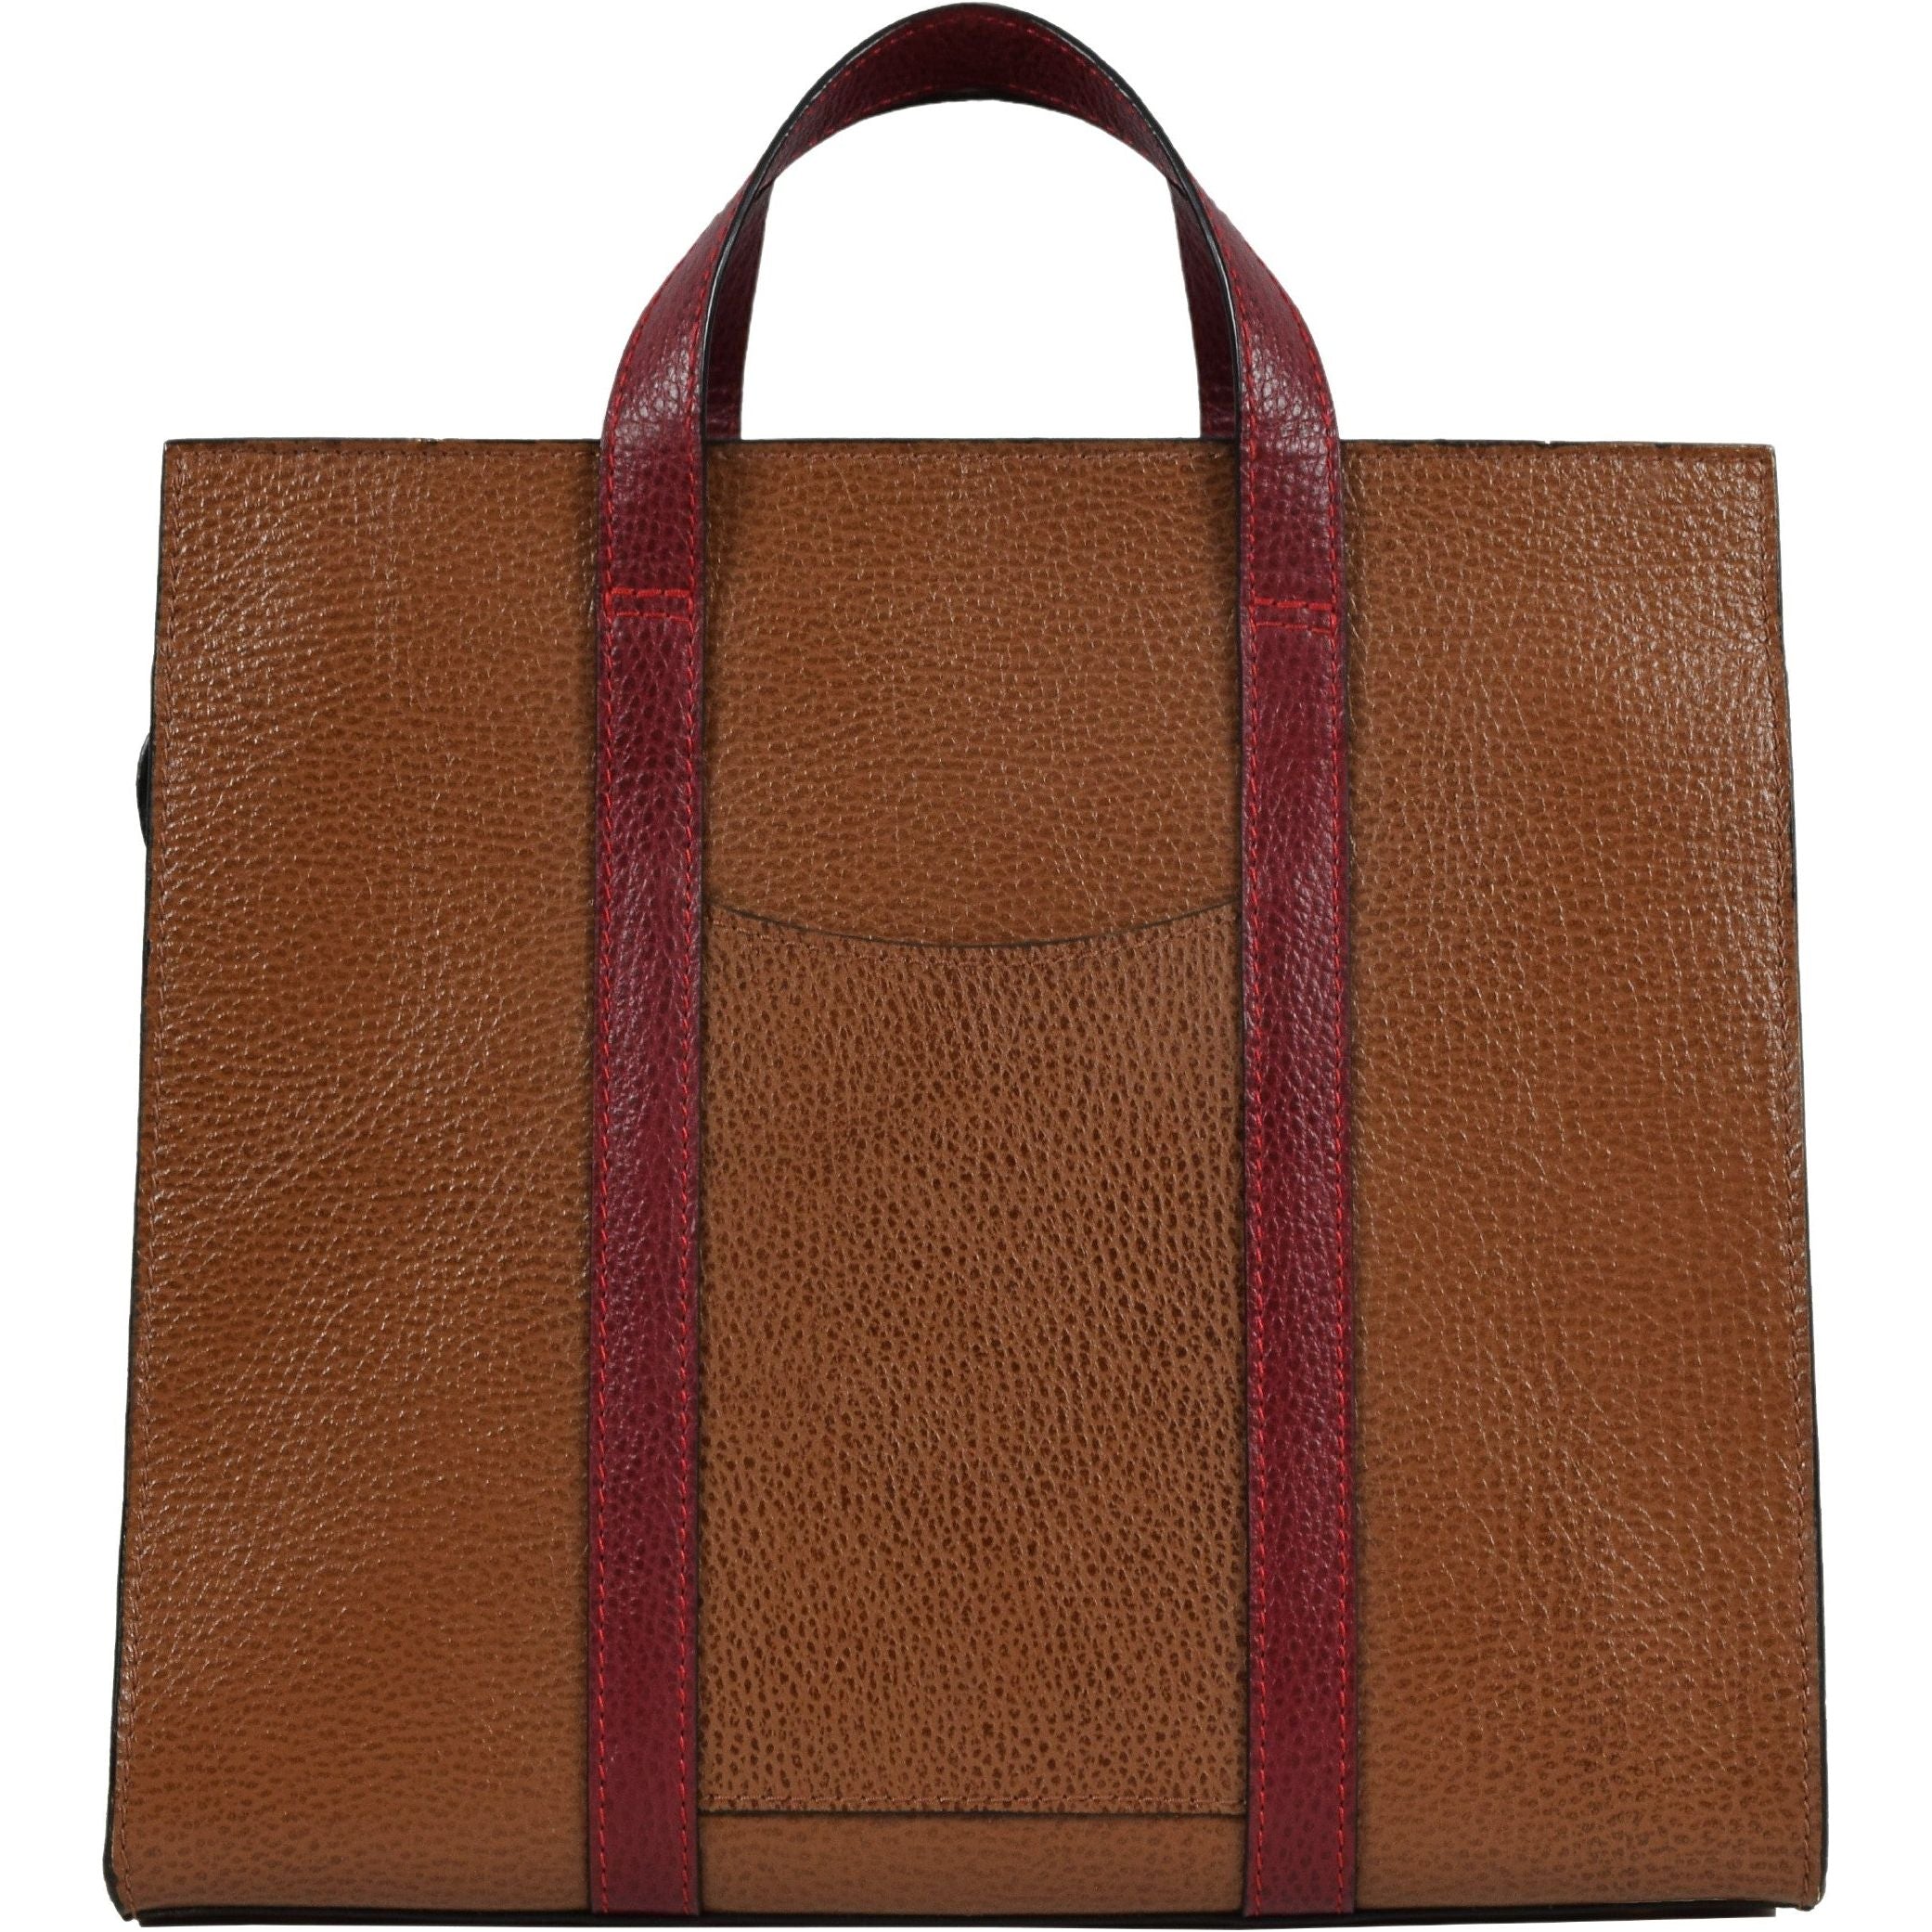 LAND Leather Goods: Premium Colombian Handmade Leather Goods Guaranteed For  Life